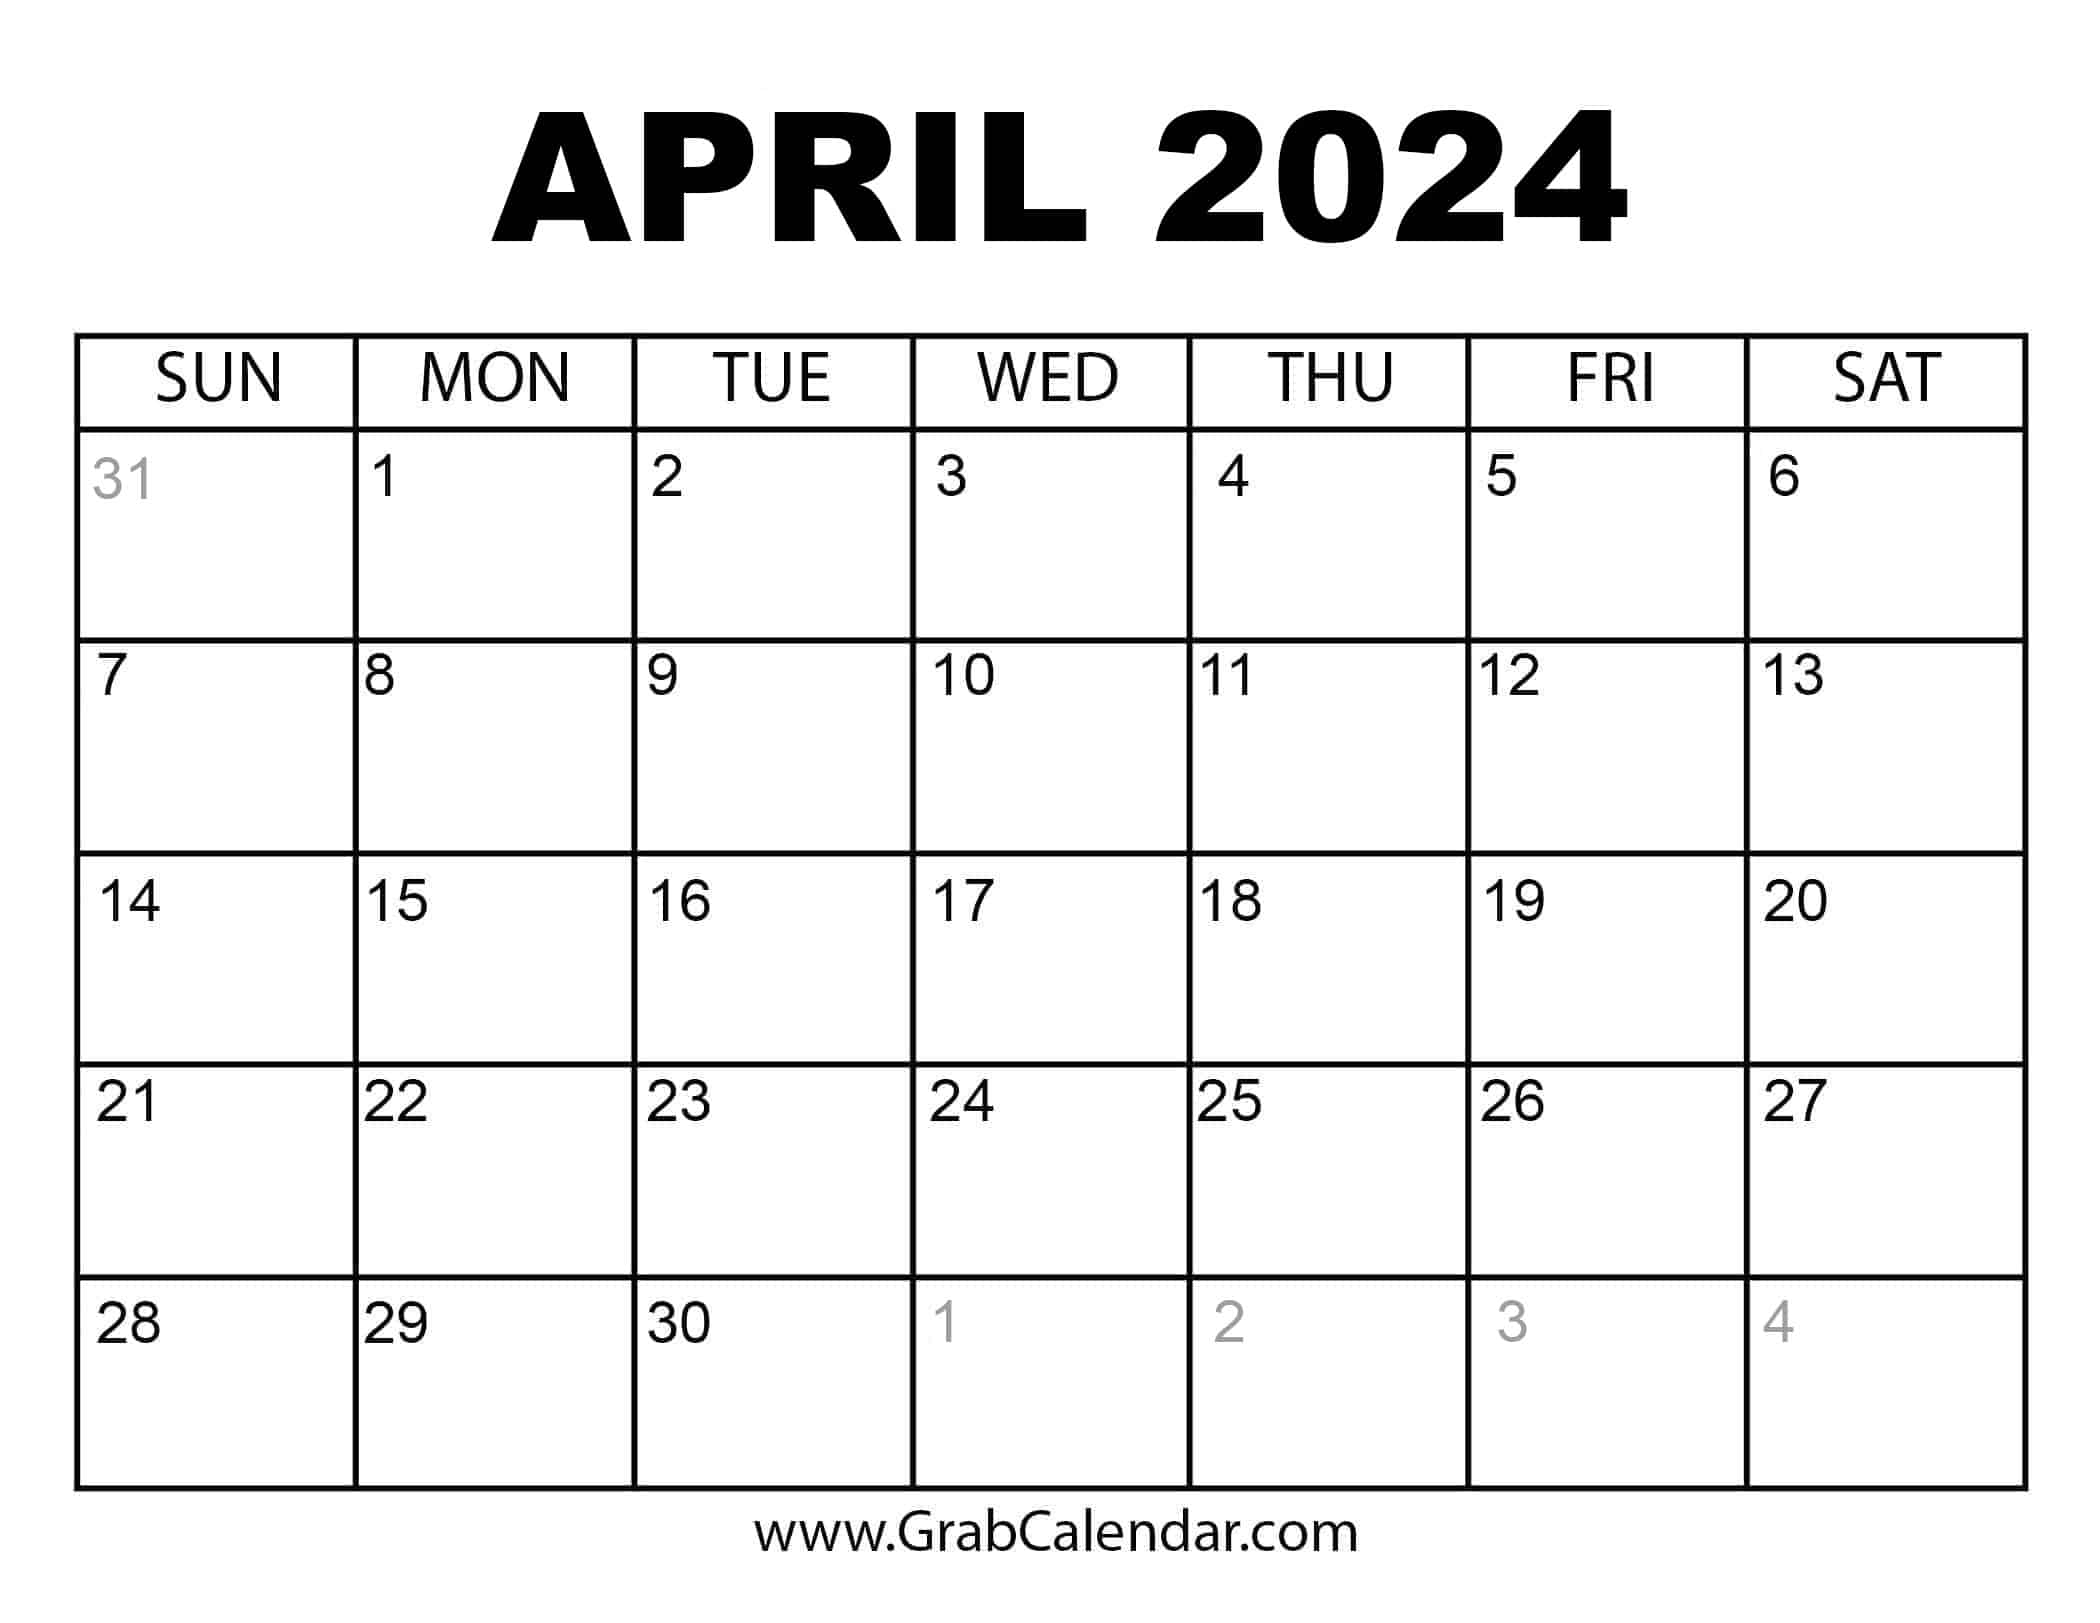 Printable April 2024 Calendar intended for Calendar Of March And April 2024